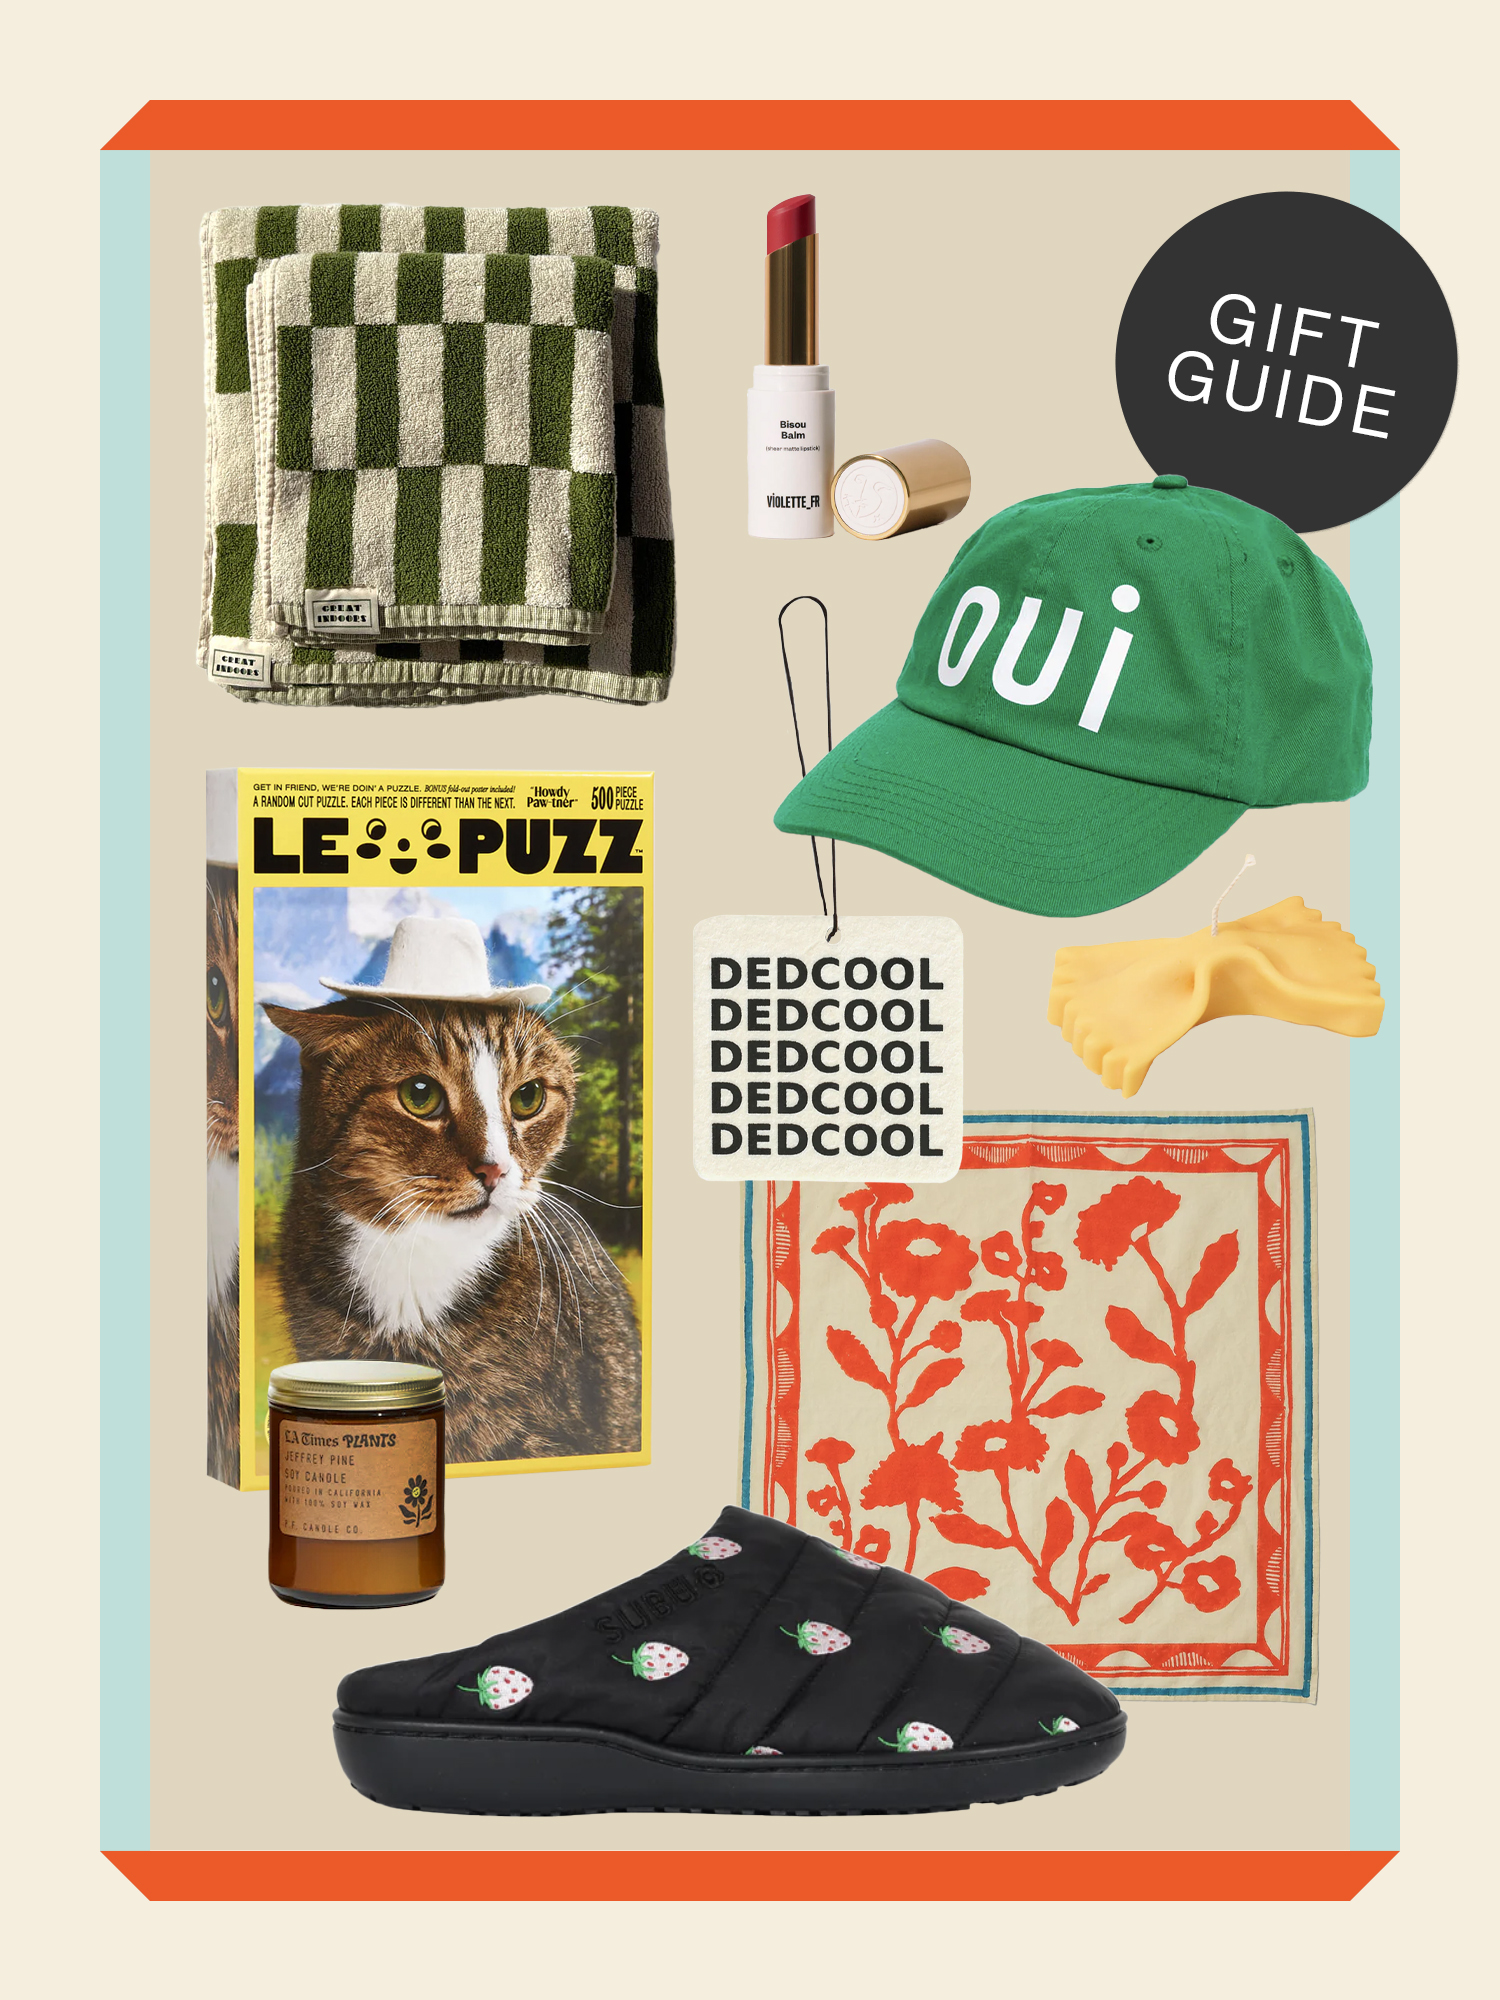 Gift Guide: 20 Gifts For Your Best Friend